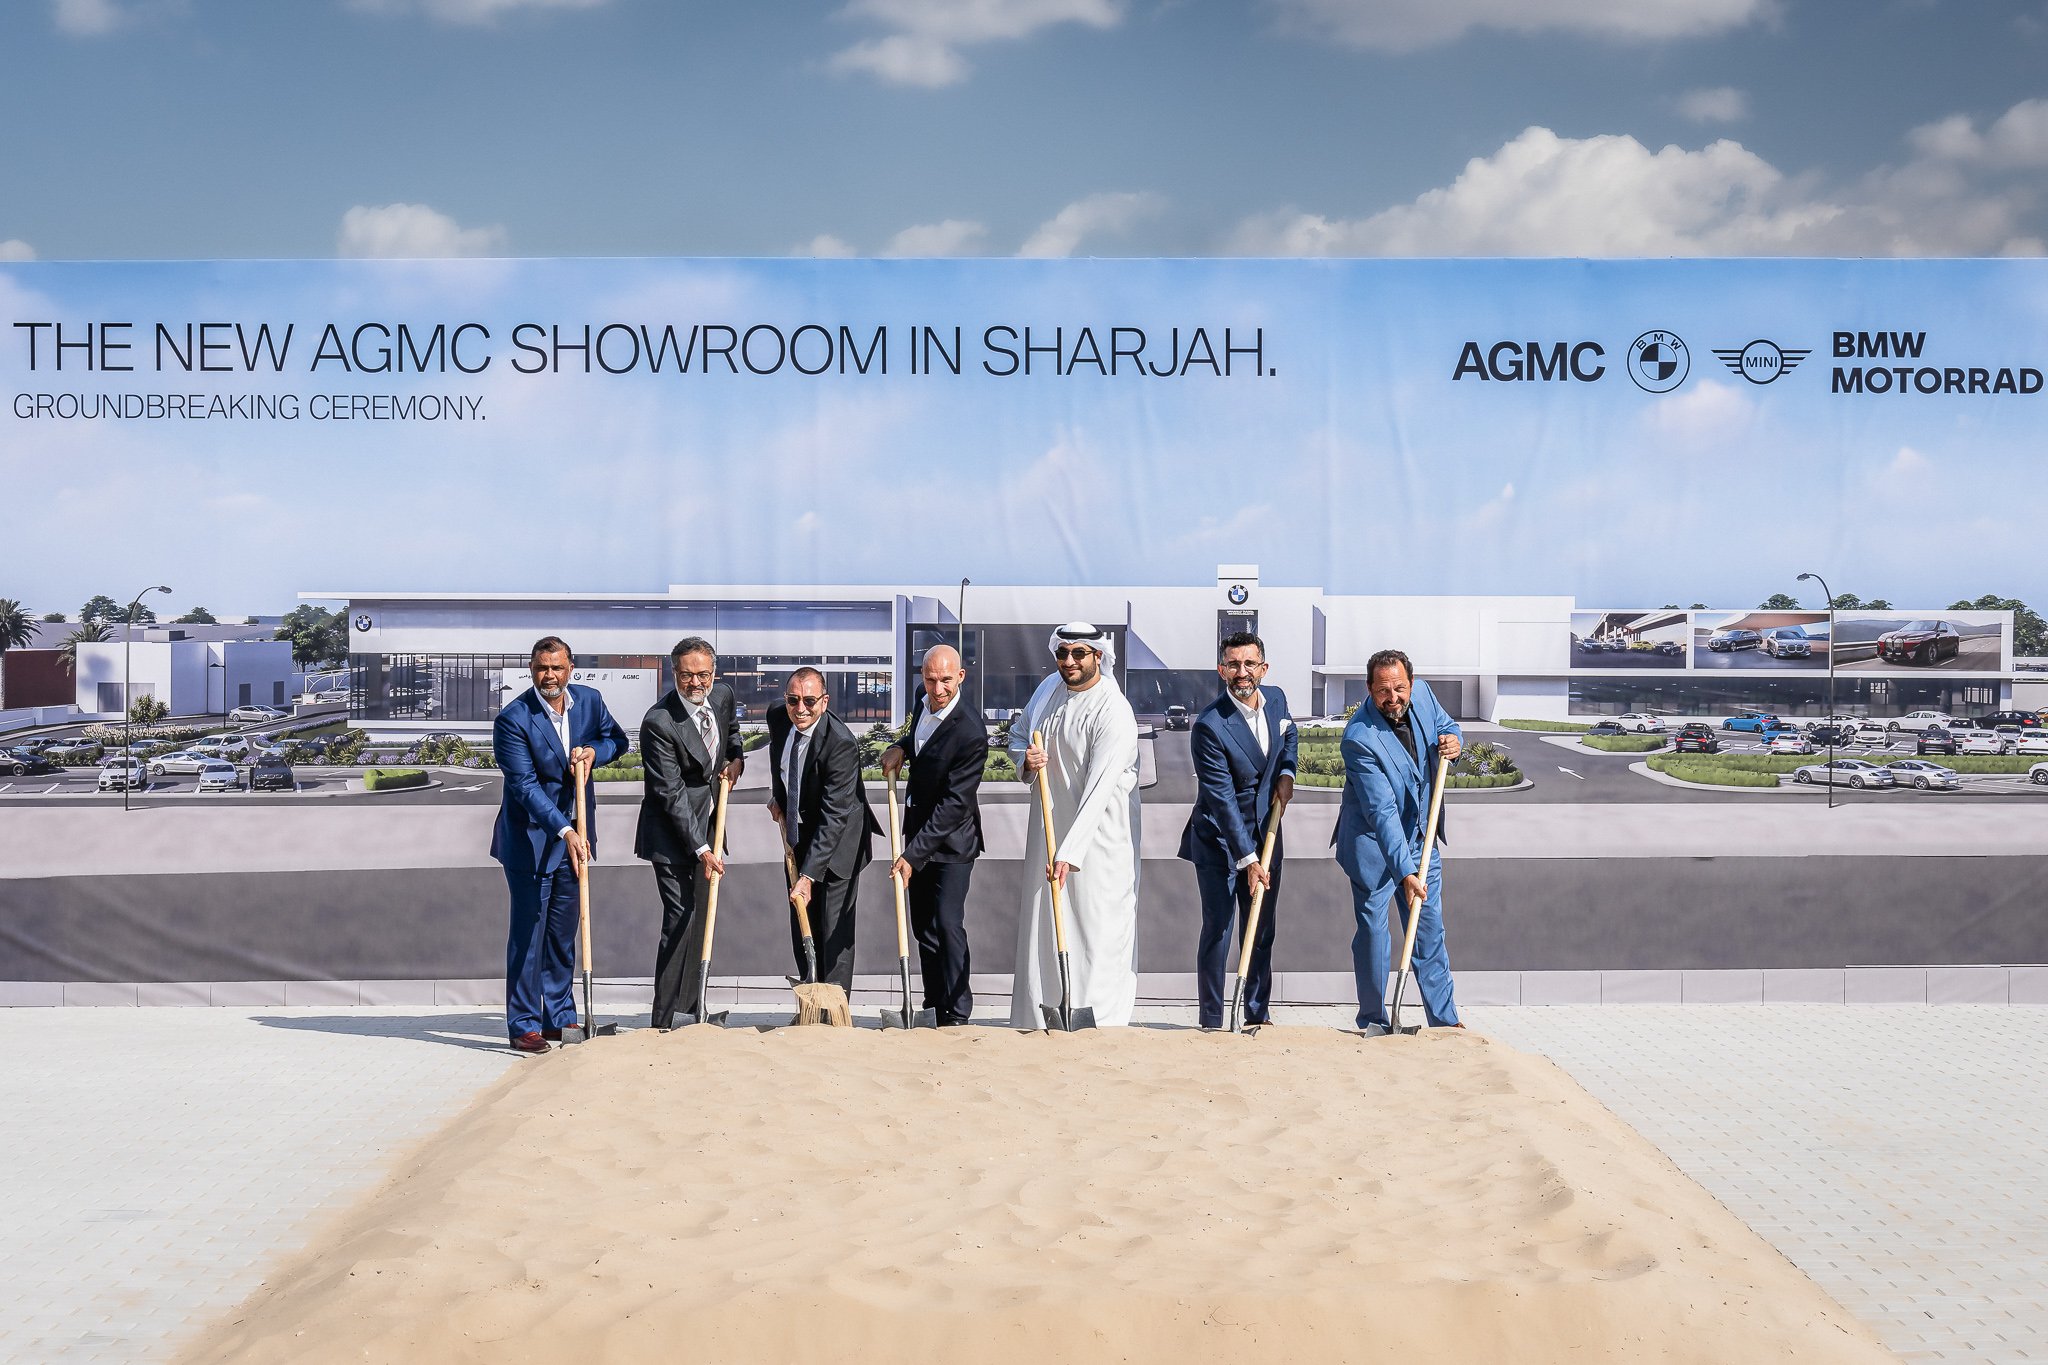 AGMC breaks ground in Sharjah with new 117,000 square foot BMW Group facility